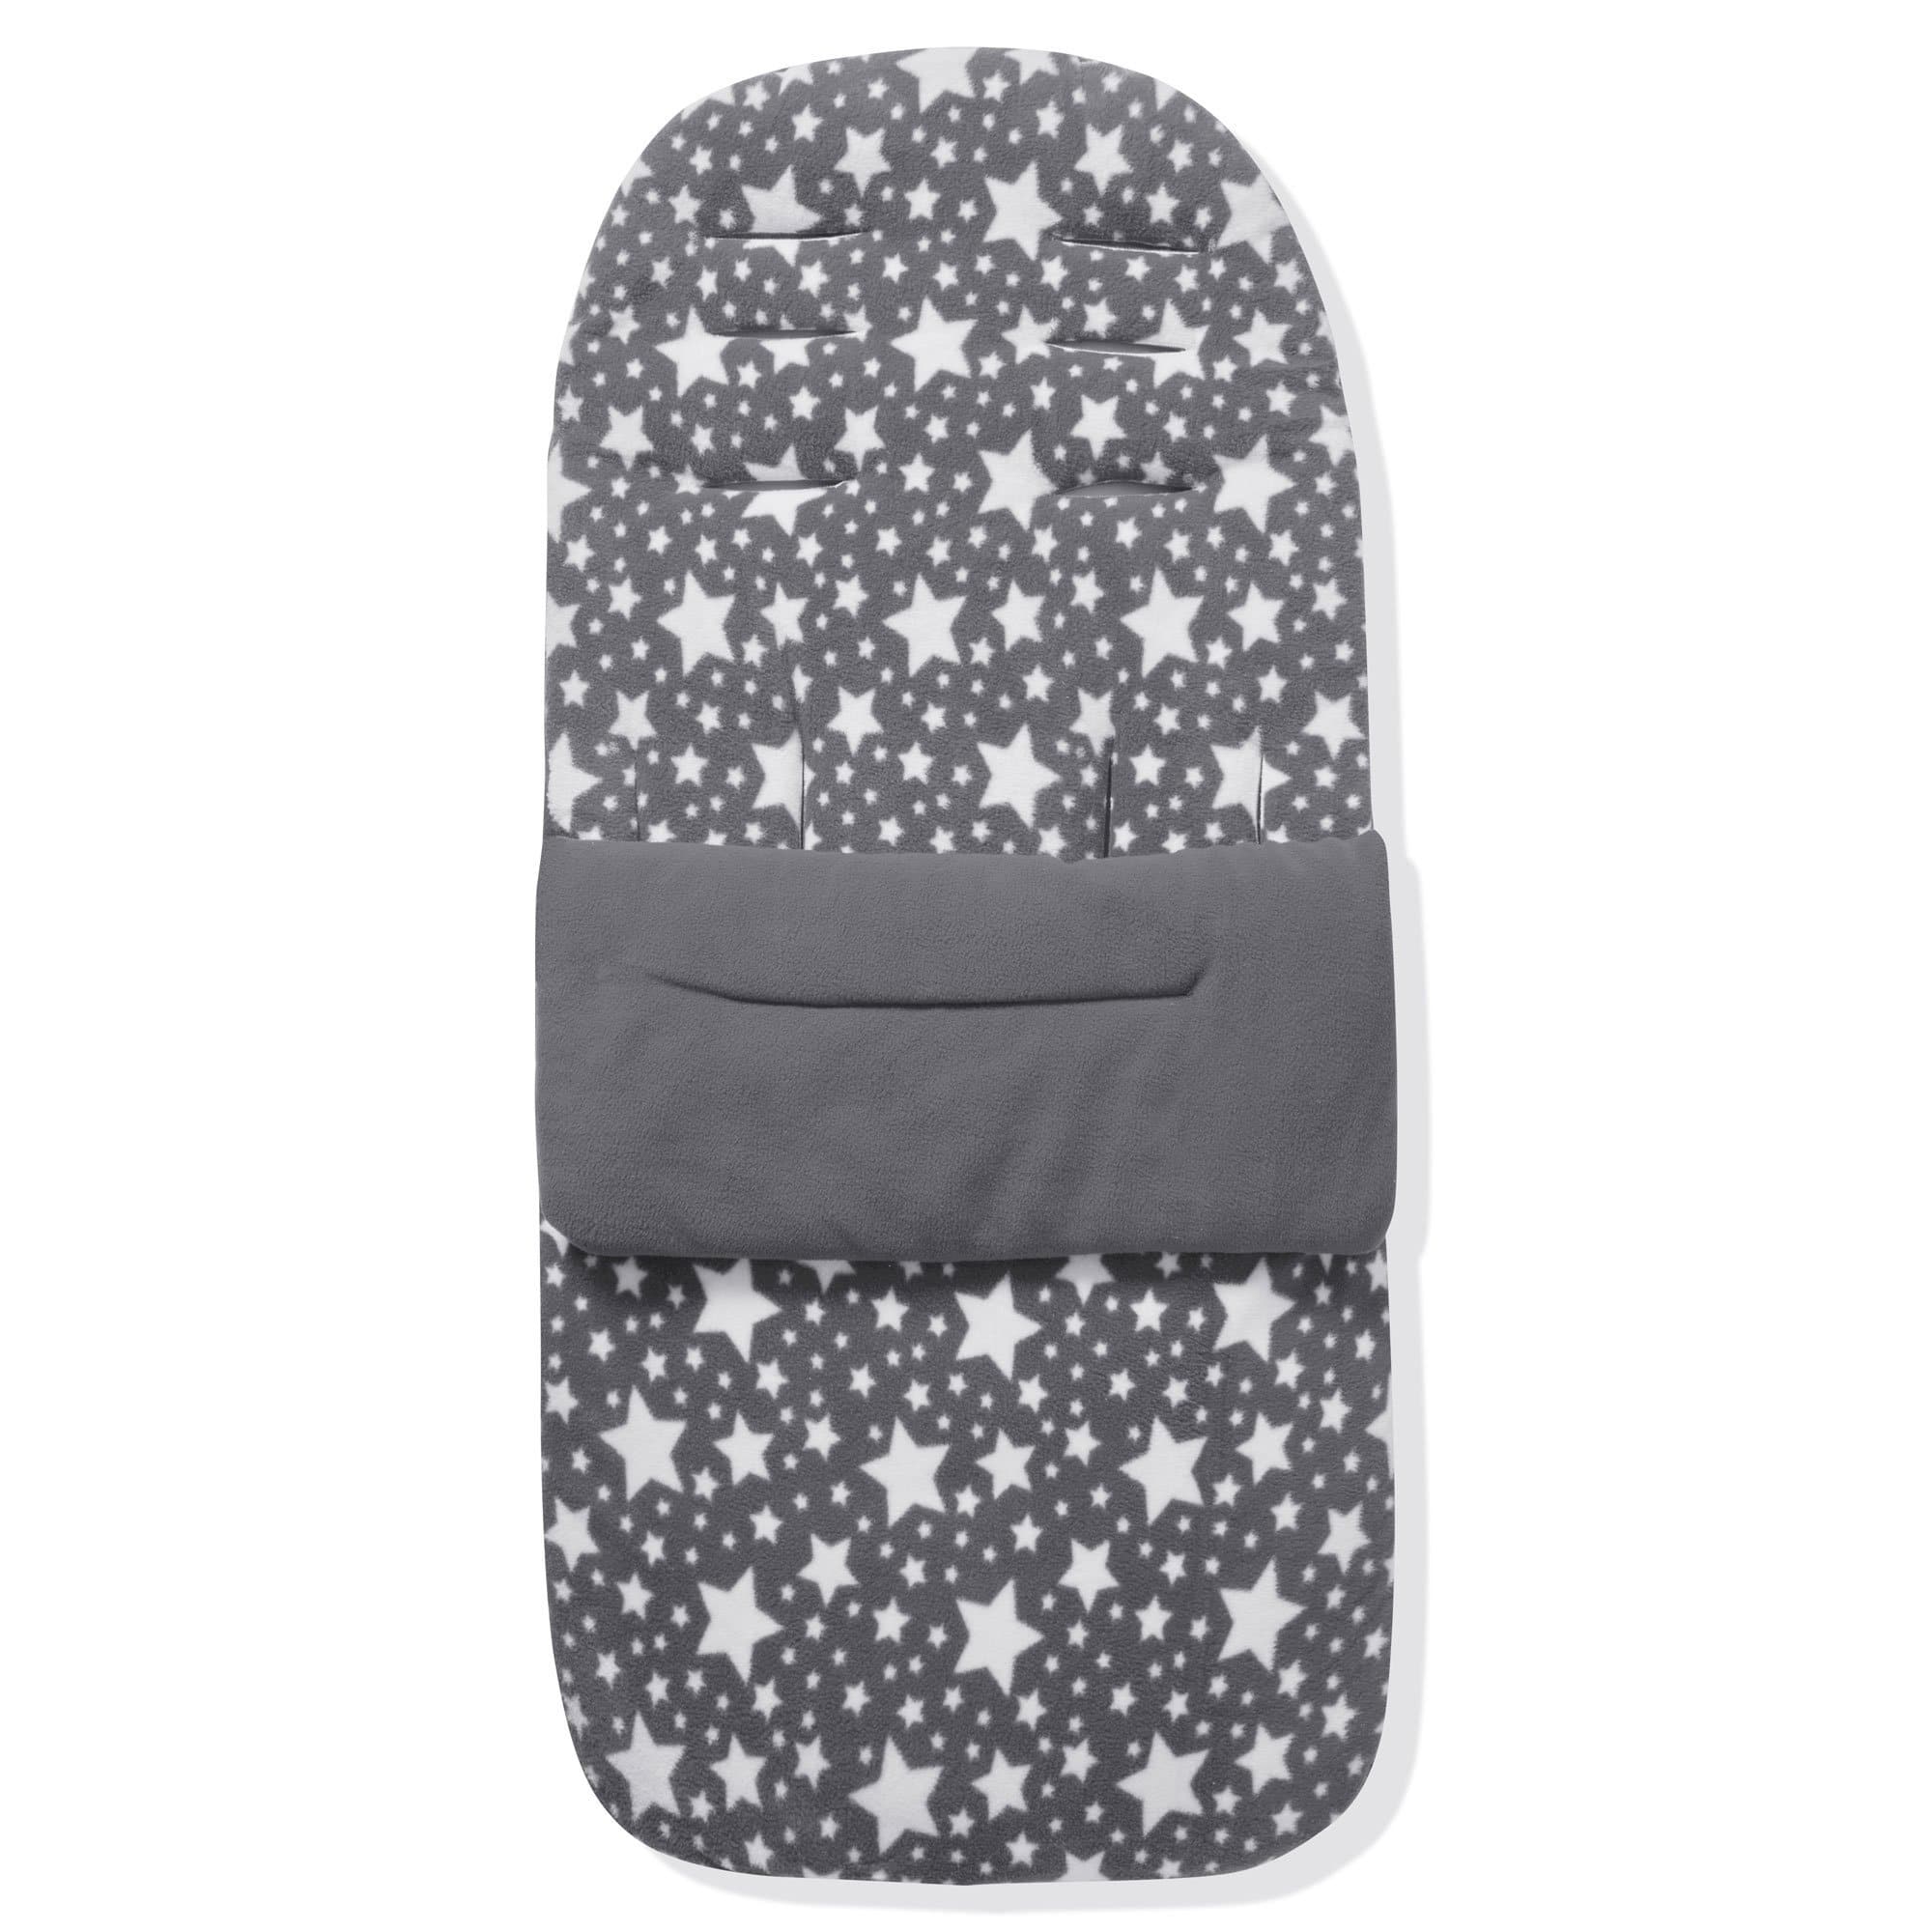 Fleece Footmuff / Cosy Toes Compatible with Bebe 9 - For Your Little One